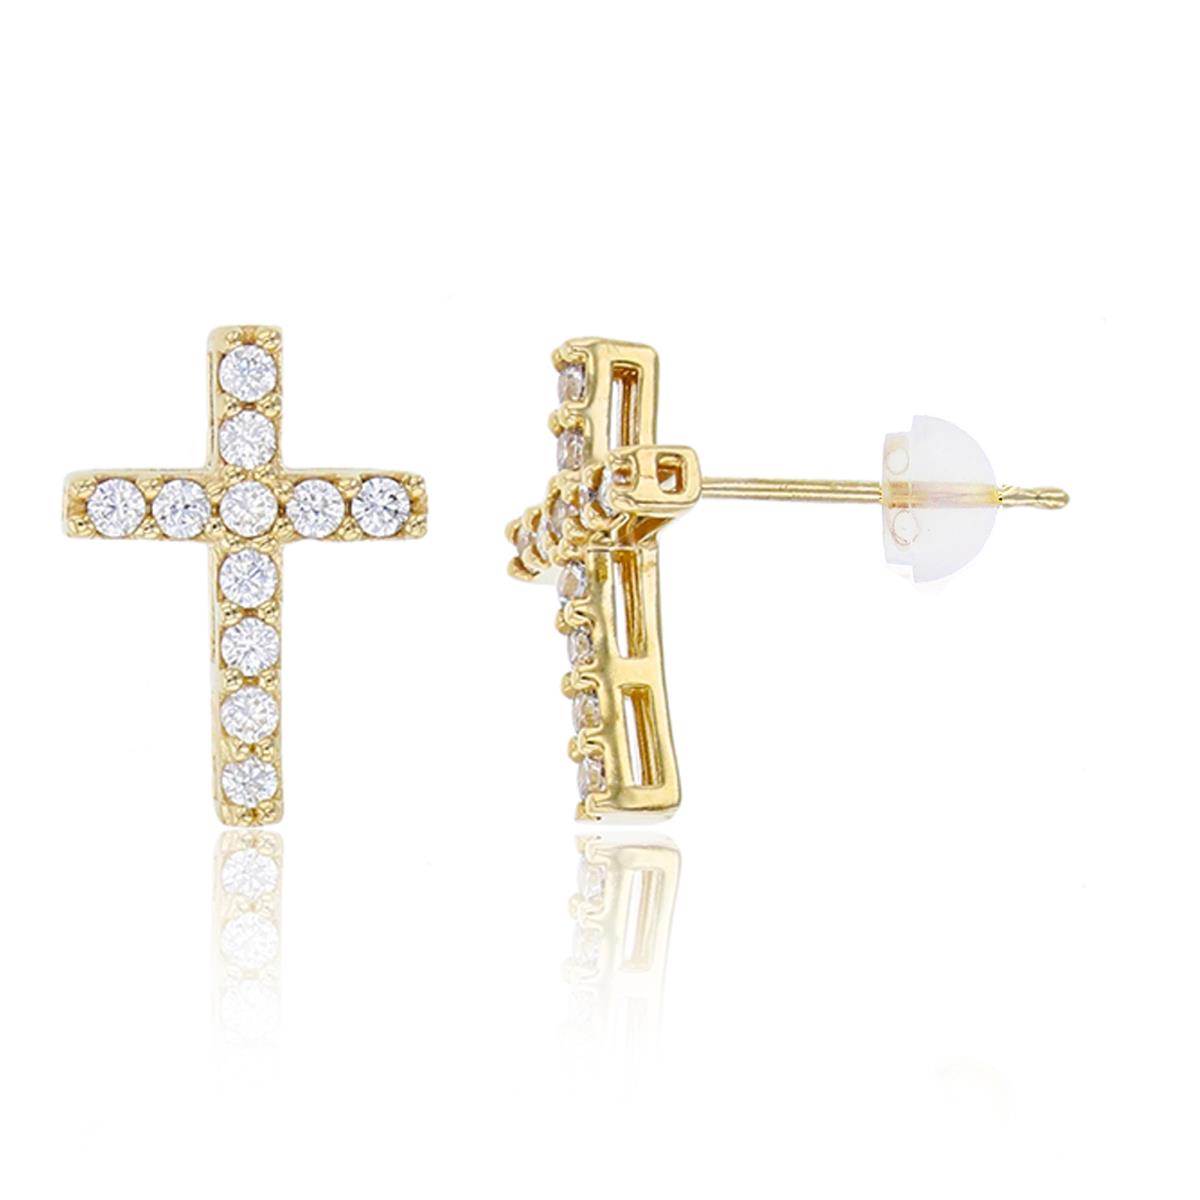 10K Yellow Gold 11x8mm Micropave CZ Cross Stud Earring with Silicone Back